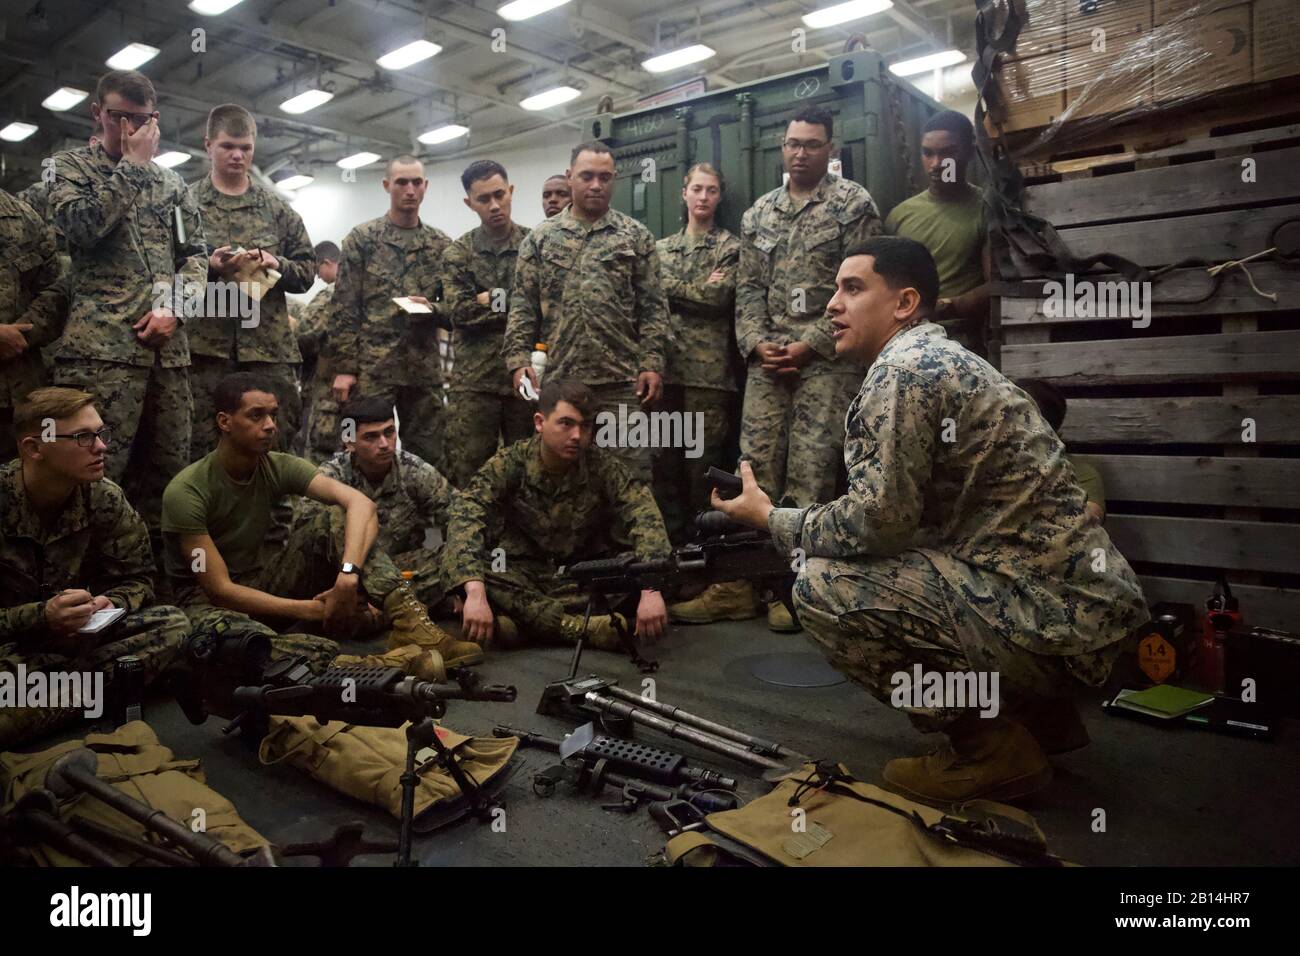 U.S. Marine Corps Sgt. David Steele, right, a small arms technician with Combat Logistics Battalion 31, teaches the specifications of the M240G/B medium machine gun and the M2 .50-caliber Browning machine gun to Marines of CLB-31 aboard the dock landing ship USS Ashland (LSD 48) in the East China Sea, Feb. 6, 2019. Steele, a native of Dallas, graduated from J.J. Pearce High School in May 2010 before enlisting in February 2013. In the near future, CLB-31 plans to incorporate machine gun proficient Marines into fire teams composing vehicle convoys, with medium and heavy machine guns mounted on 7 Stock Photo